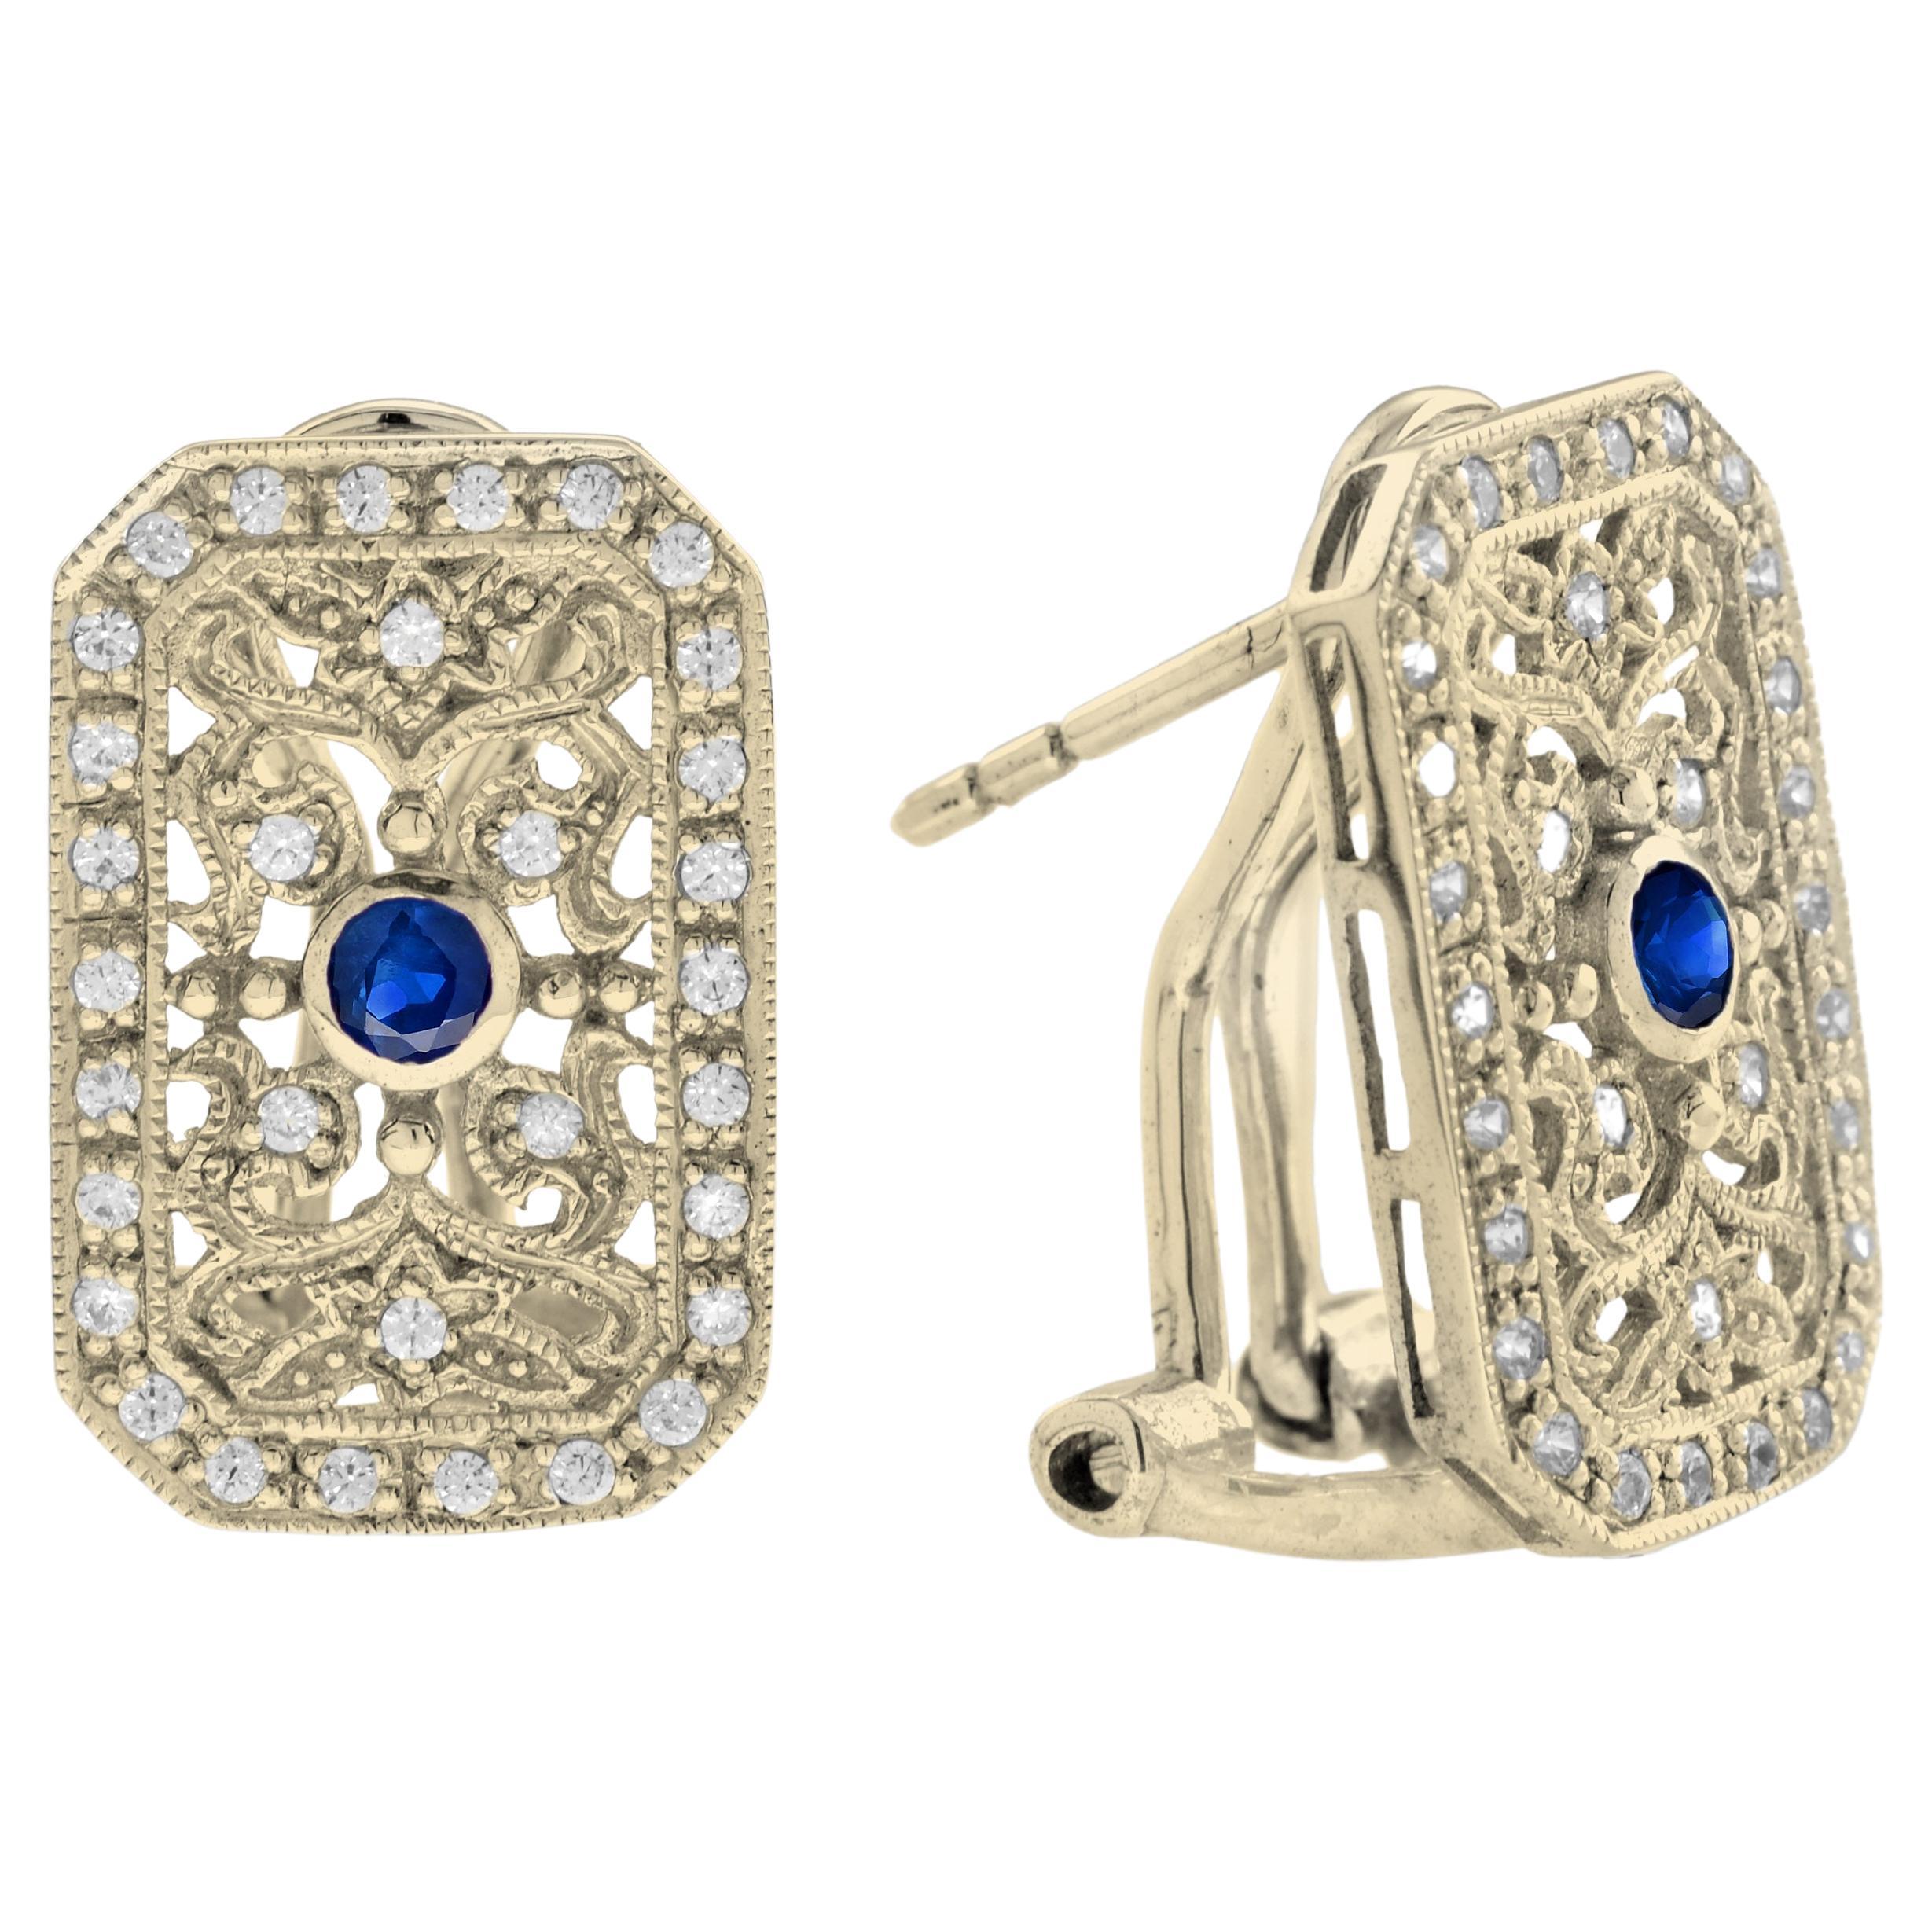 Sapphire and Diamond Vintage Style Filigree Earrings in 14K Yellow Gold